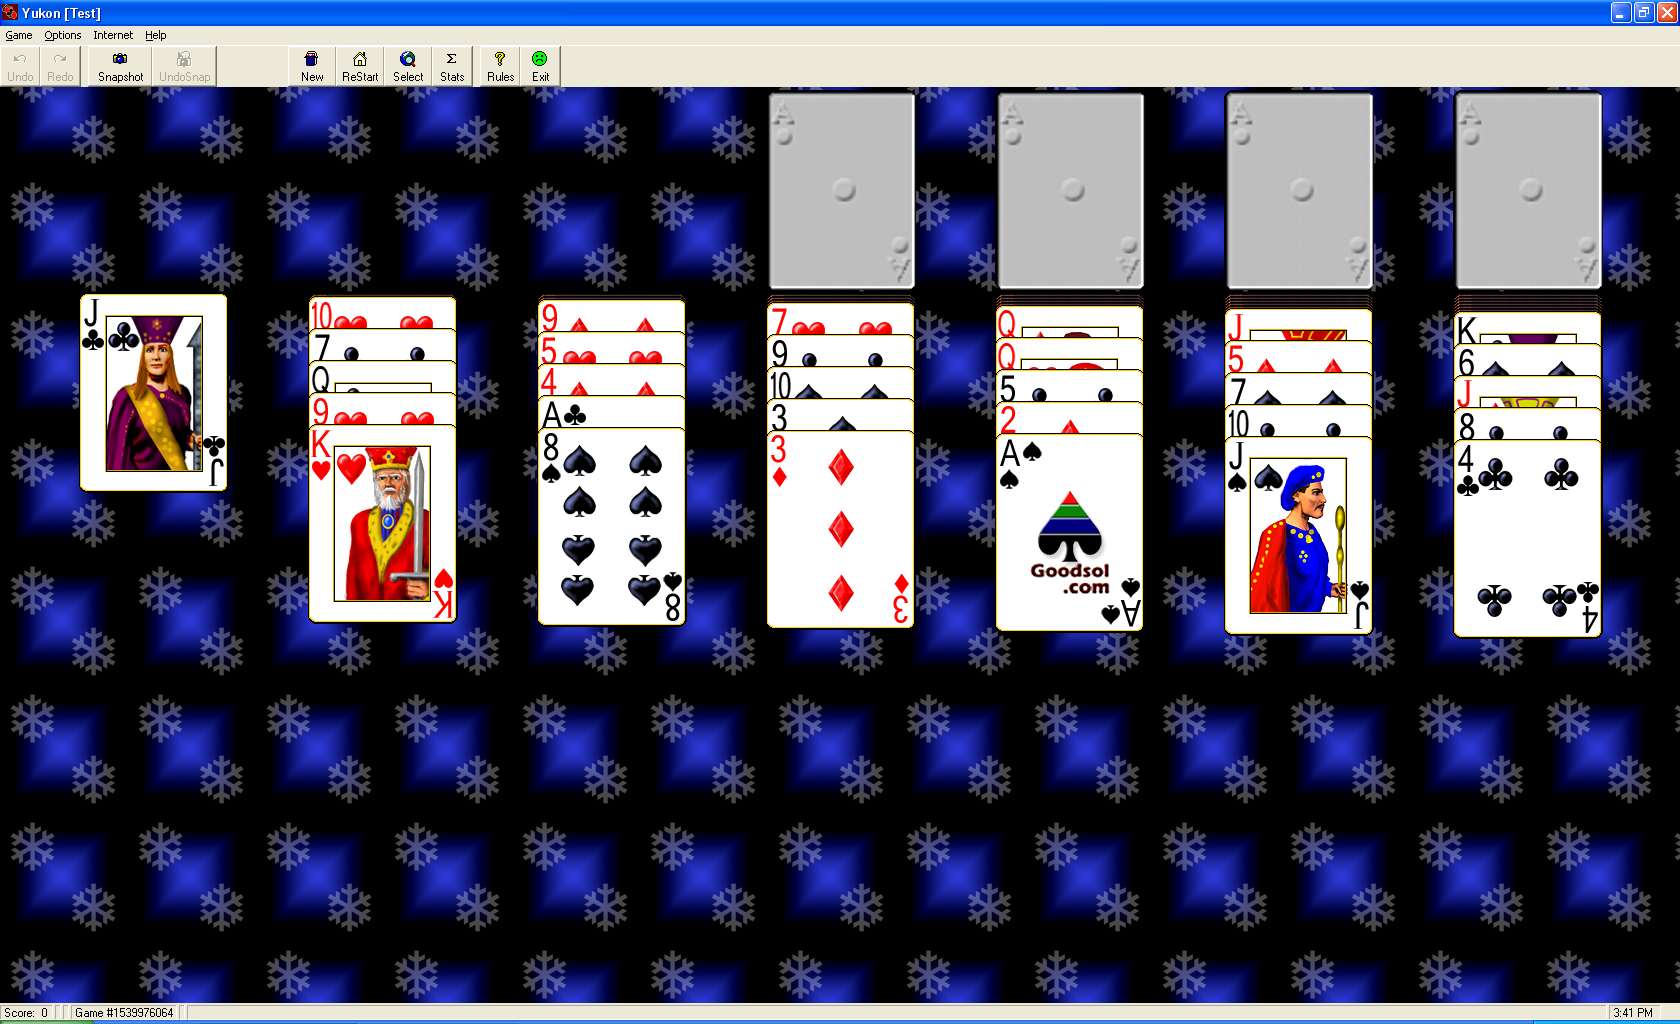 Игра королевский парад пасьянс. Solitaire after hours game. Solitaire favourite fishnets.